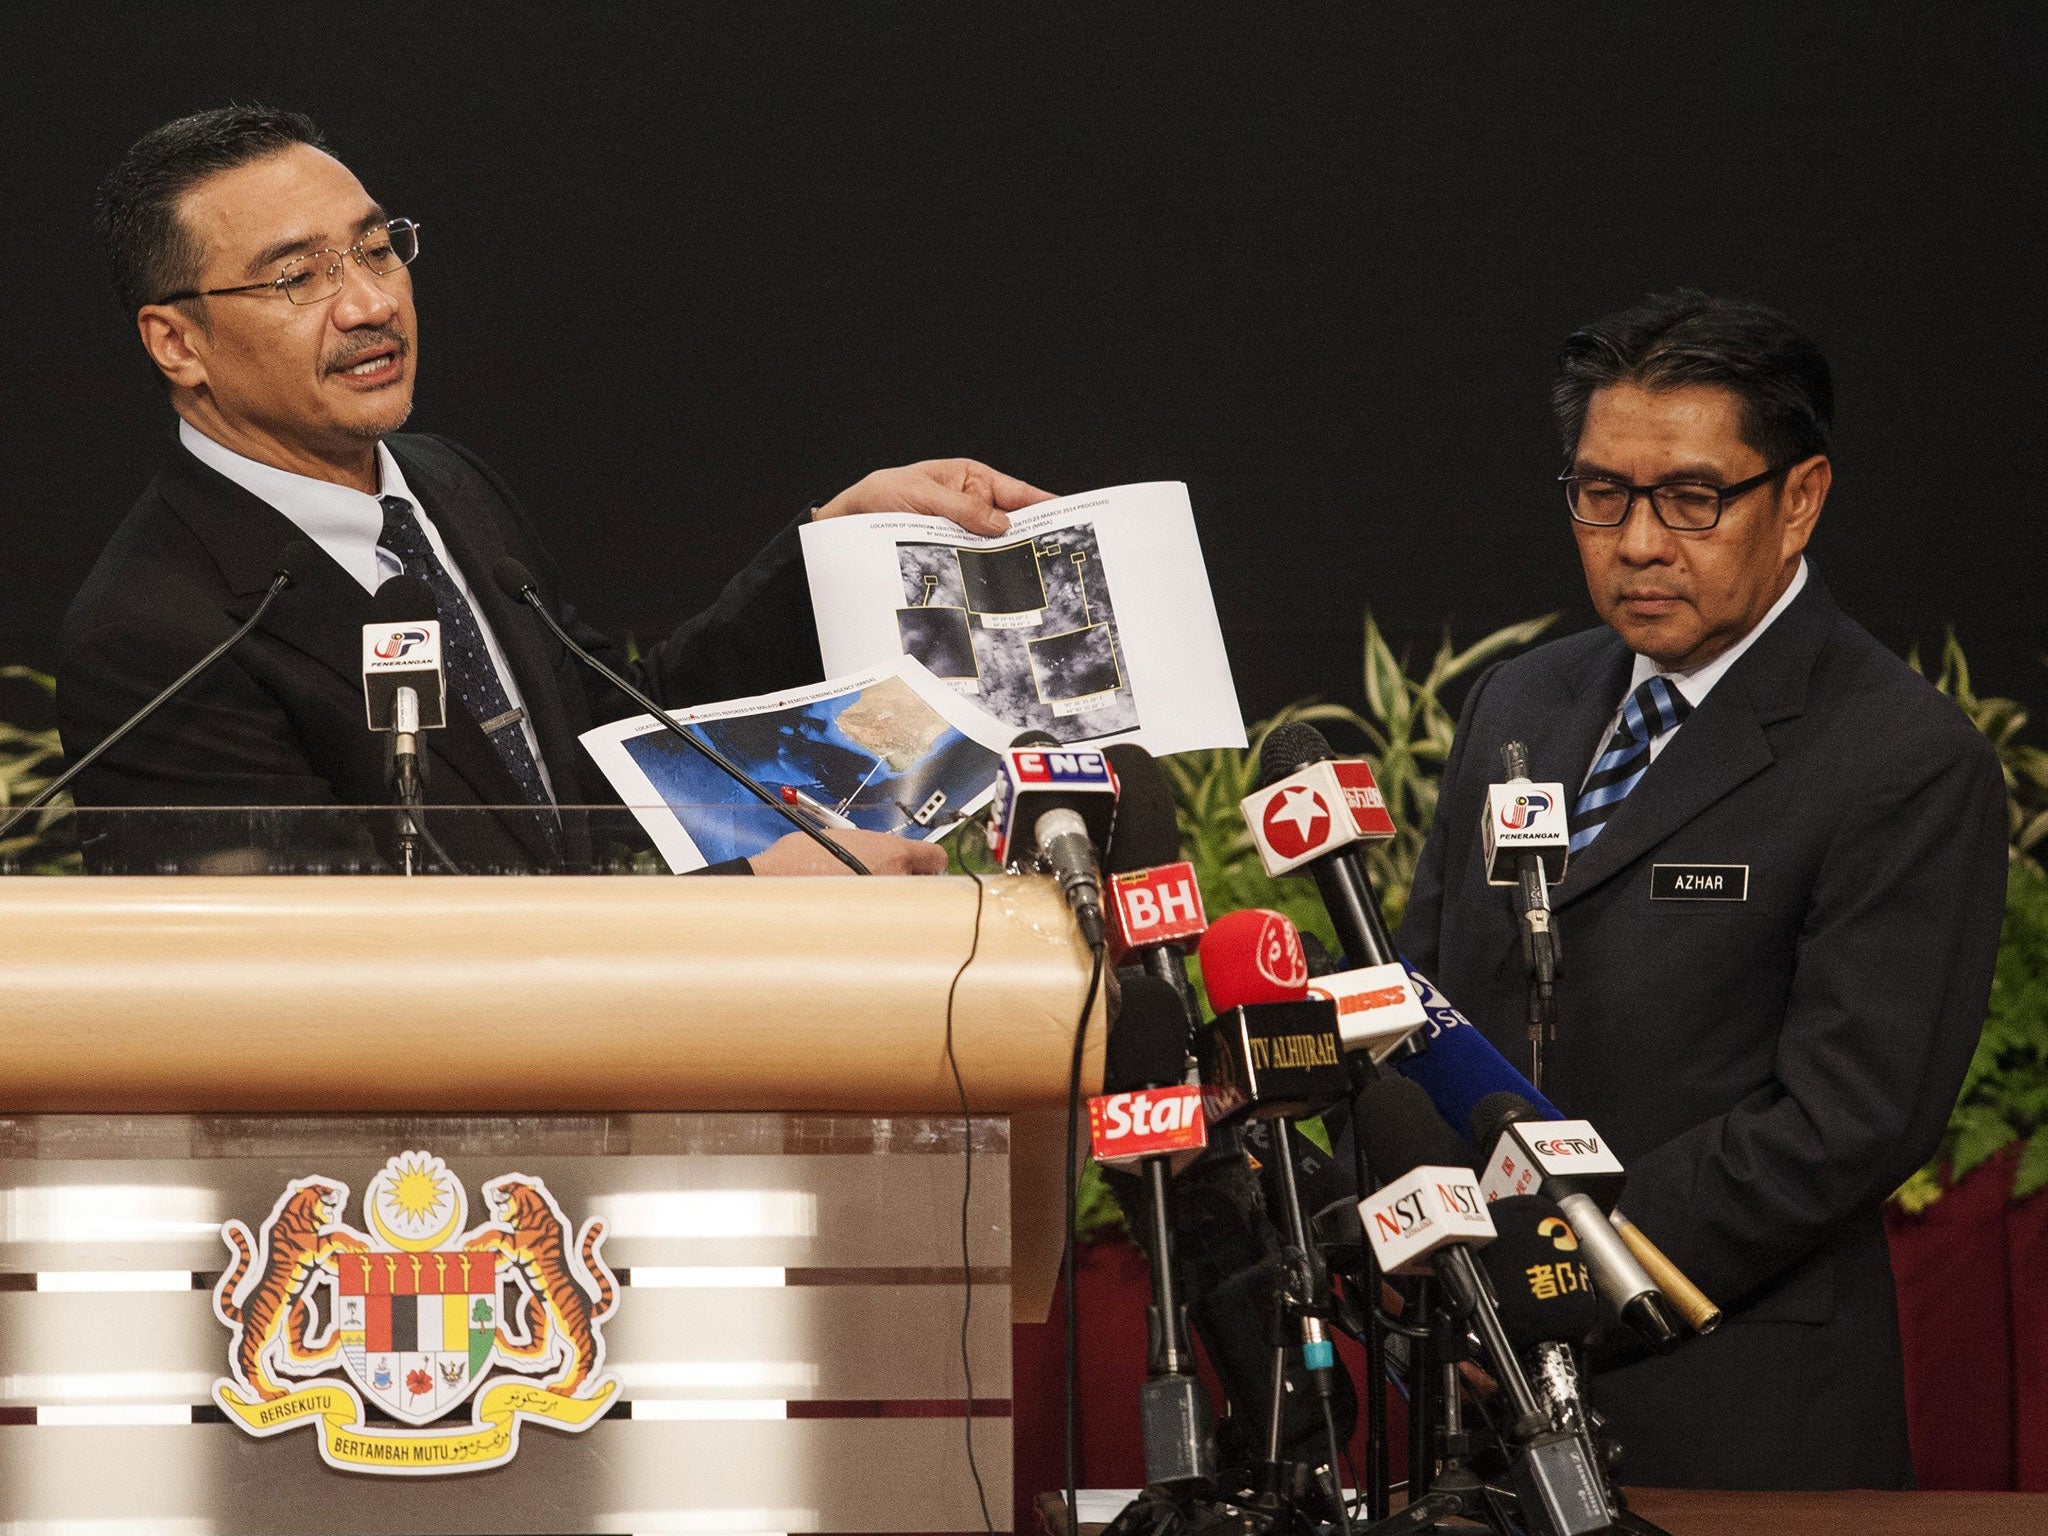 Malaysian Defense Minister and acting Transport Minister Hishammuddin Hussein (L) and Malaysia's Department Civil Aviation Director General, Azharuddin Abdul Rahman (R) show pictures of possible debris during a media conference in Kuala Lumpur